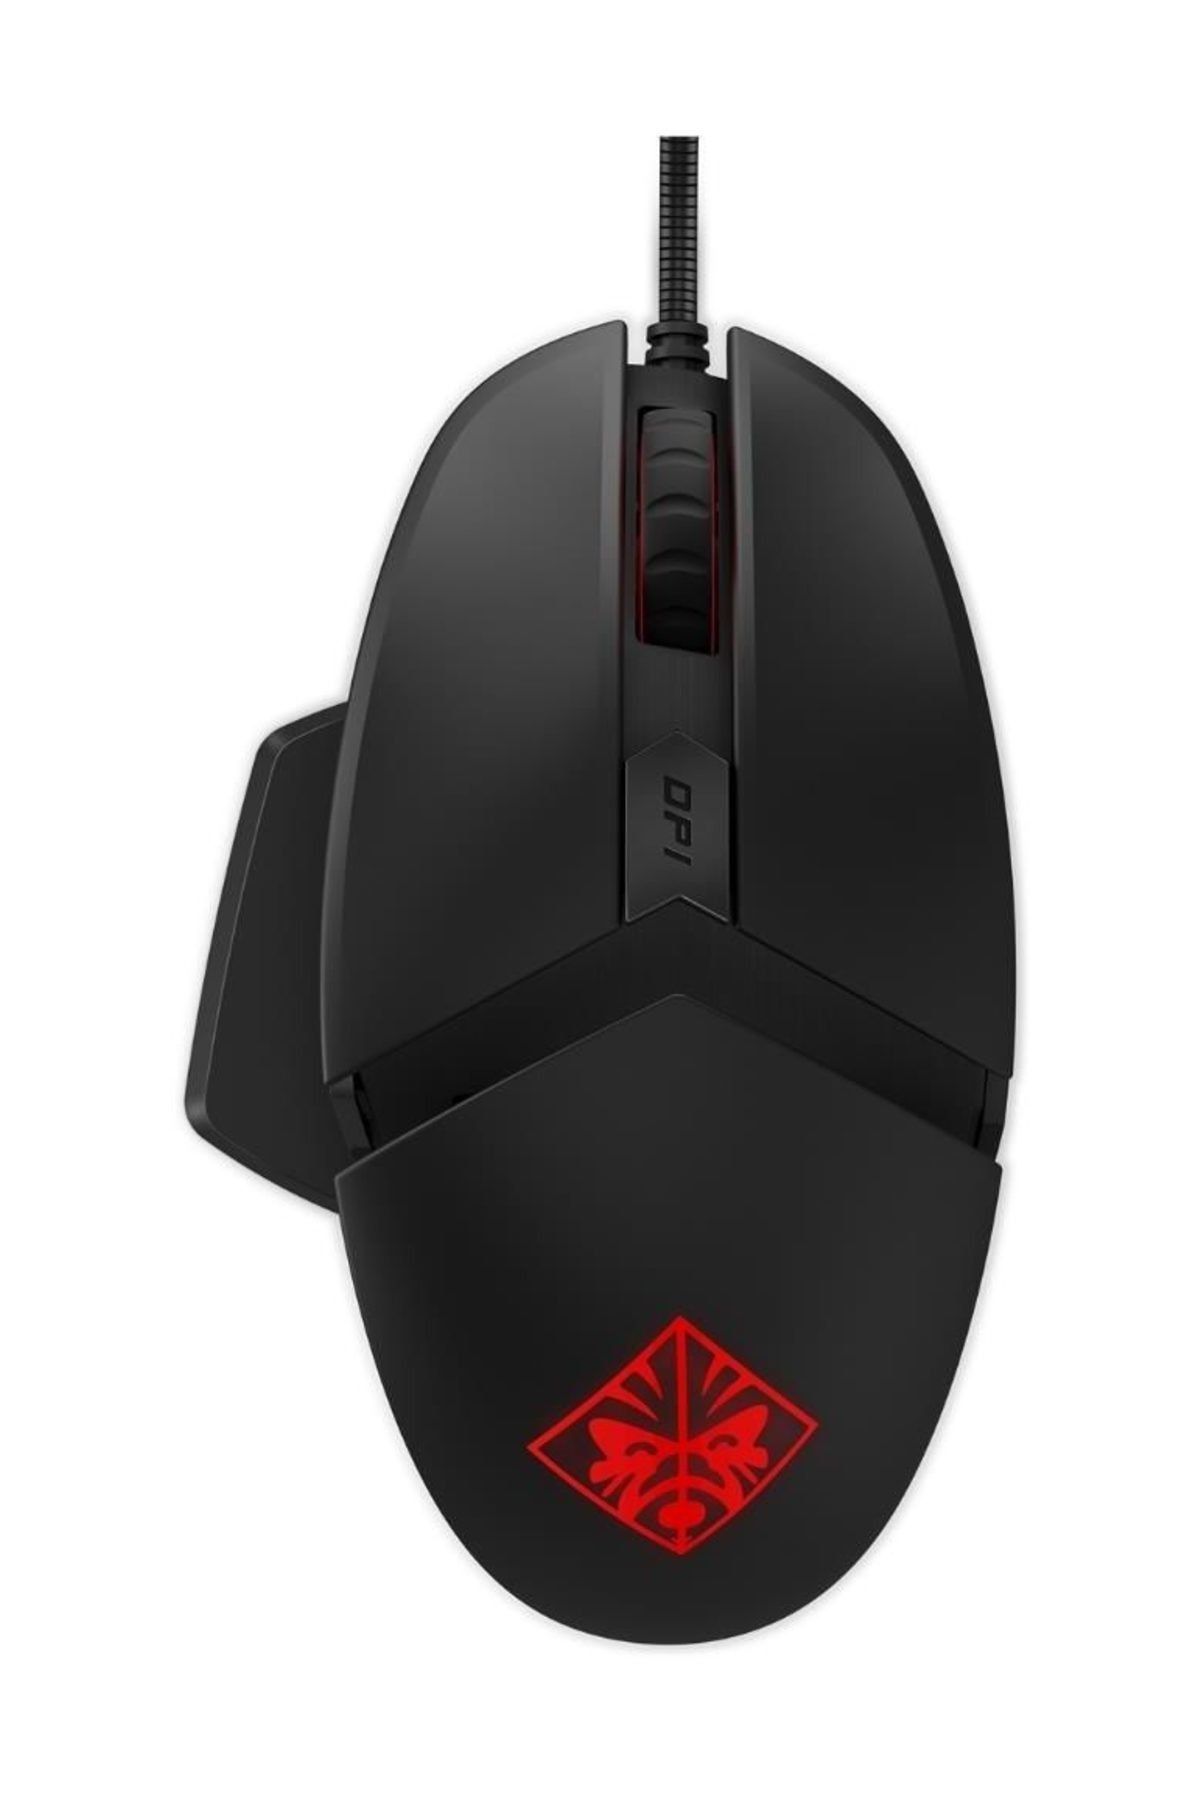 HP Omen Reactor Optical 2VP02AA Gaming Mouse